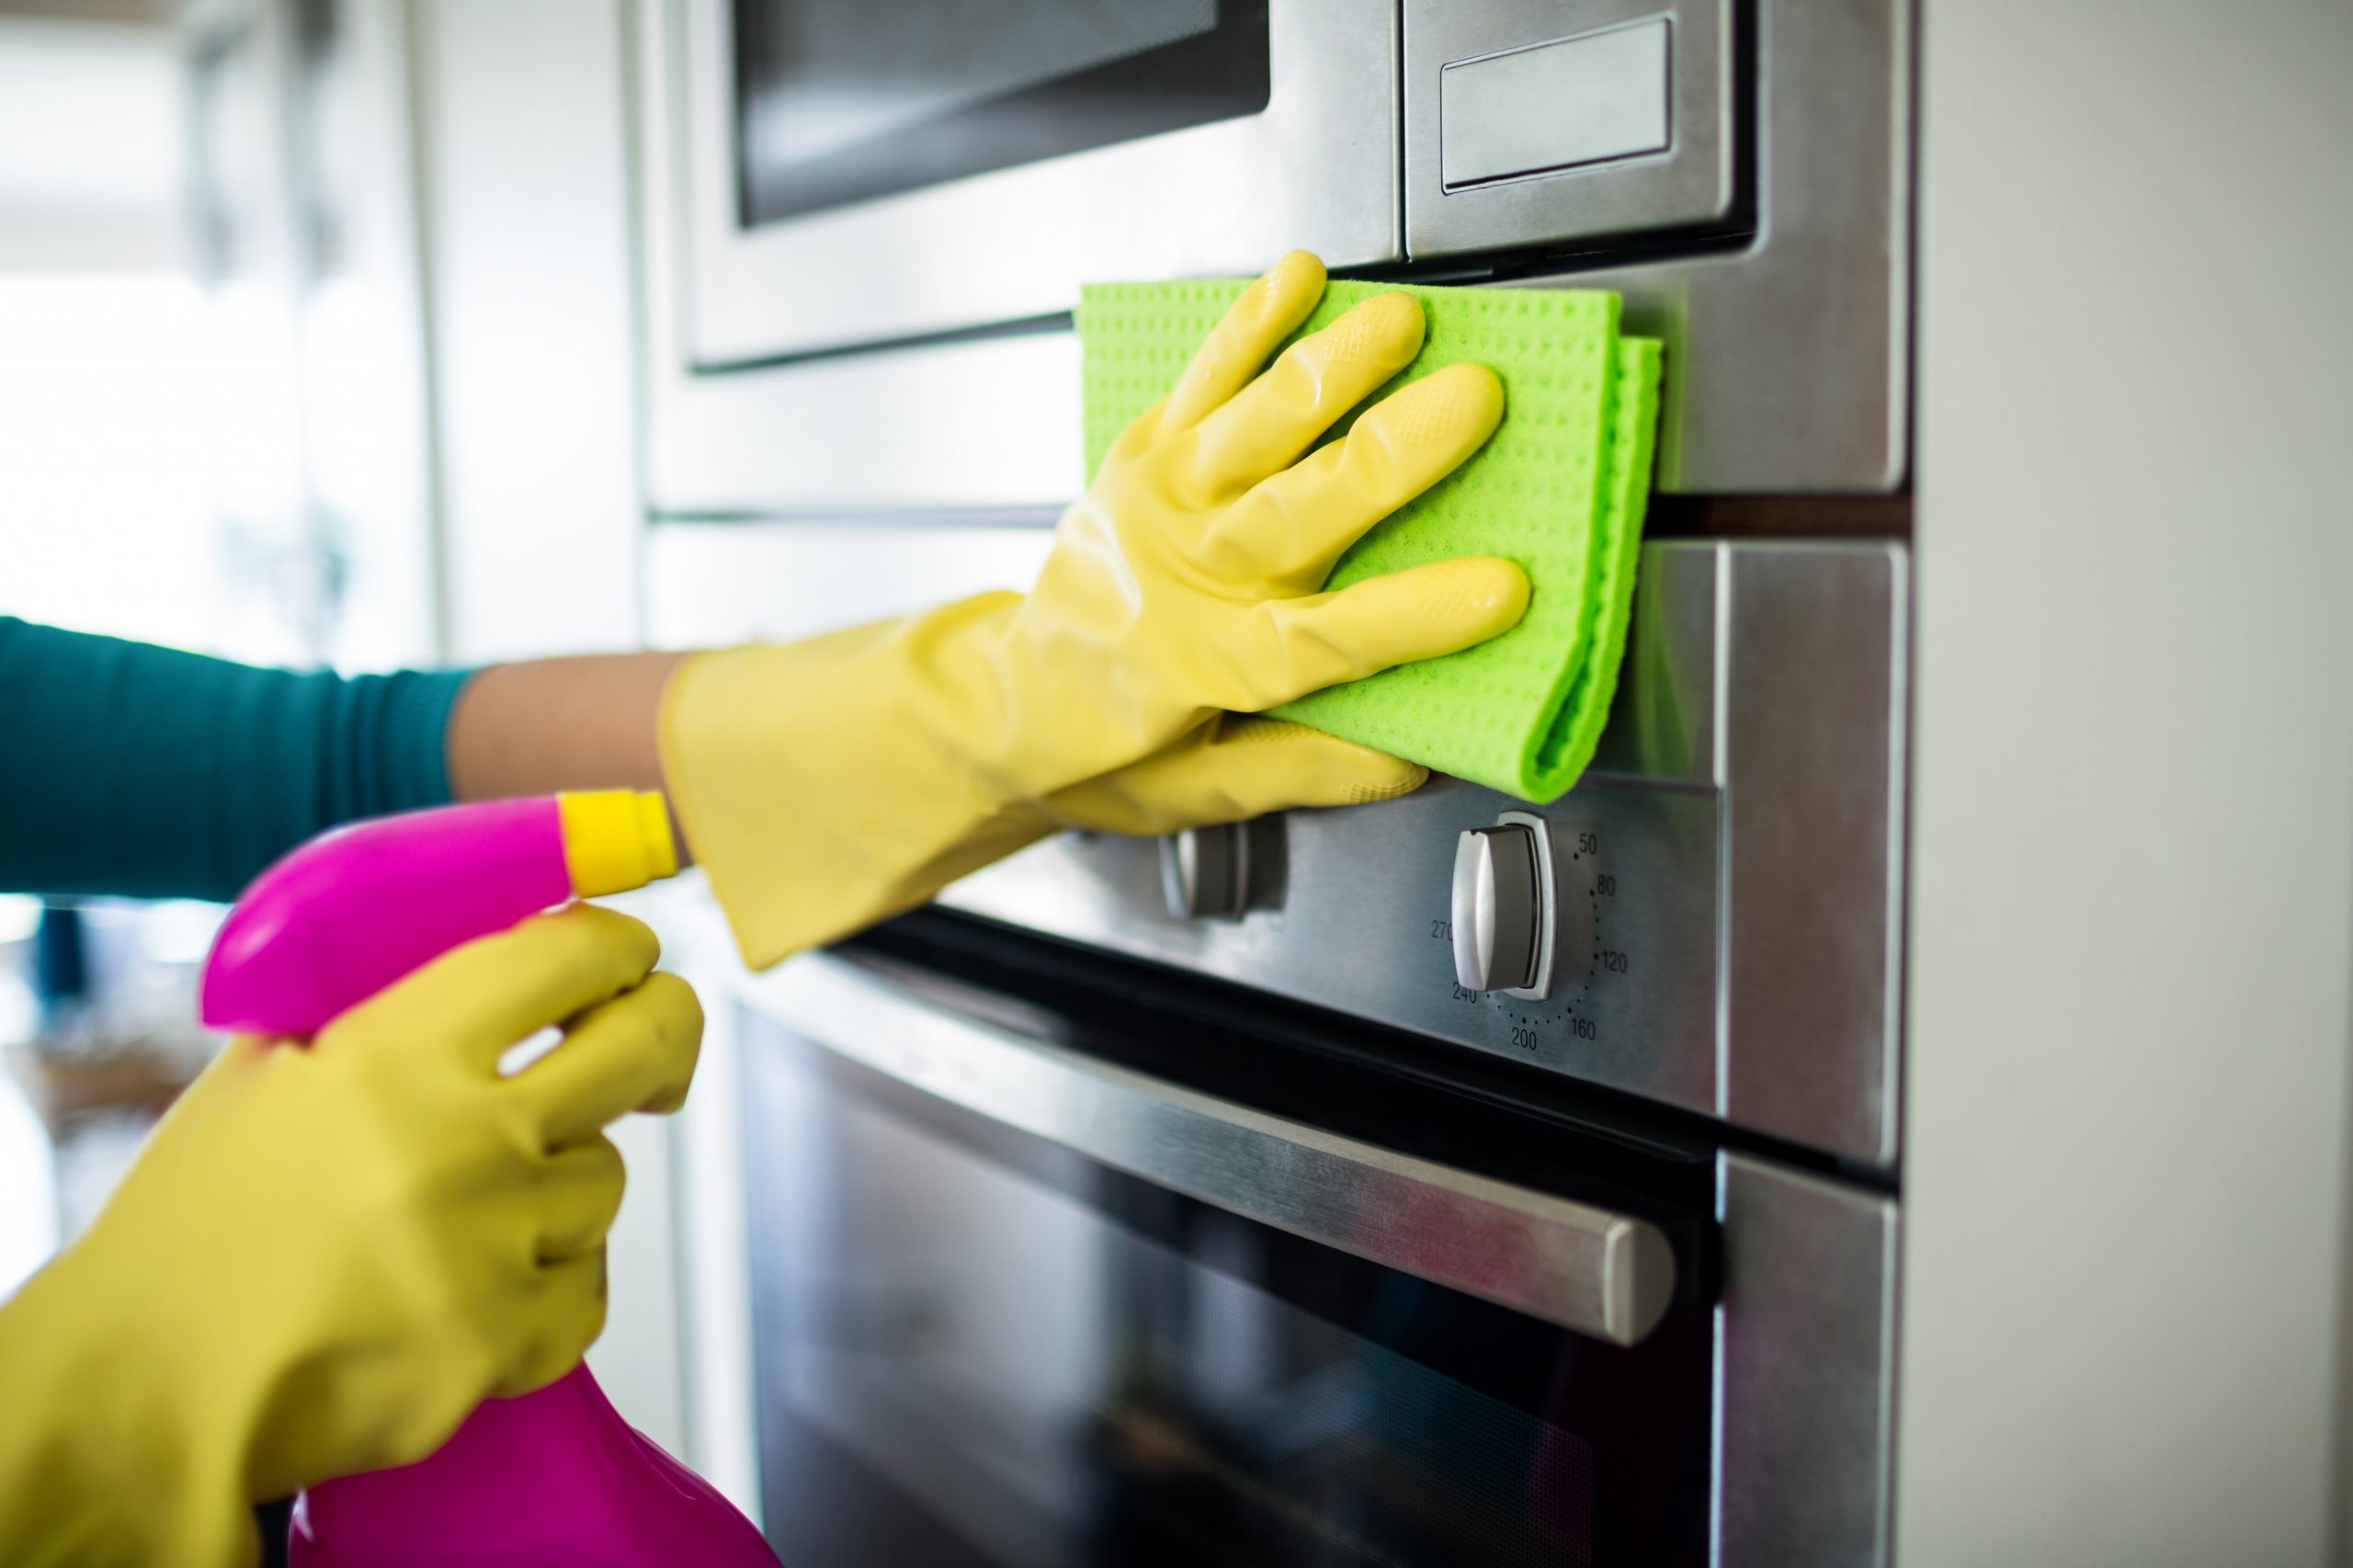 how to clean your oven